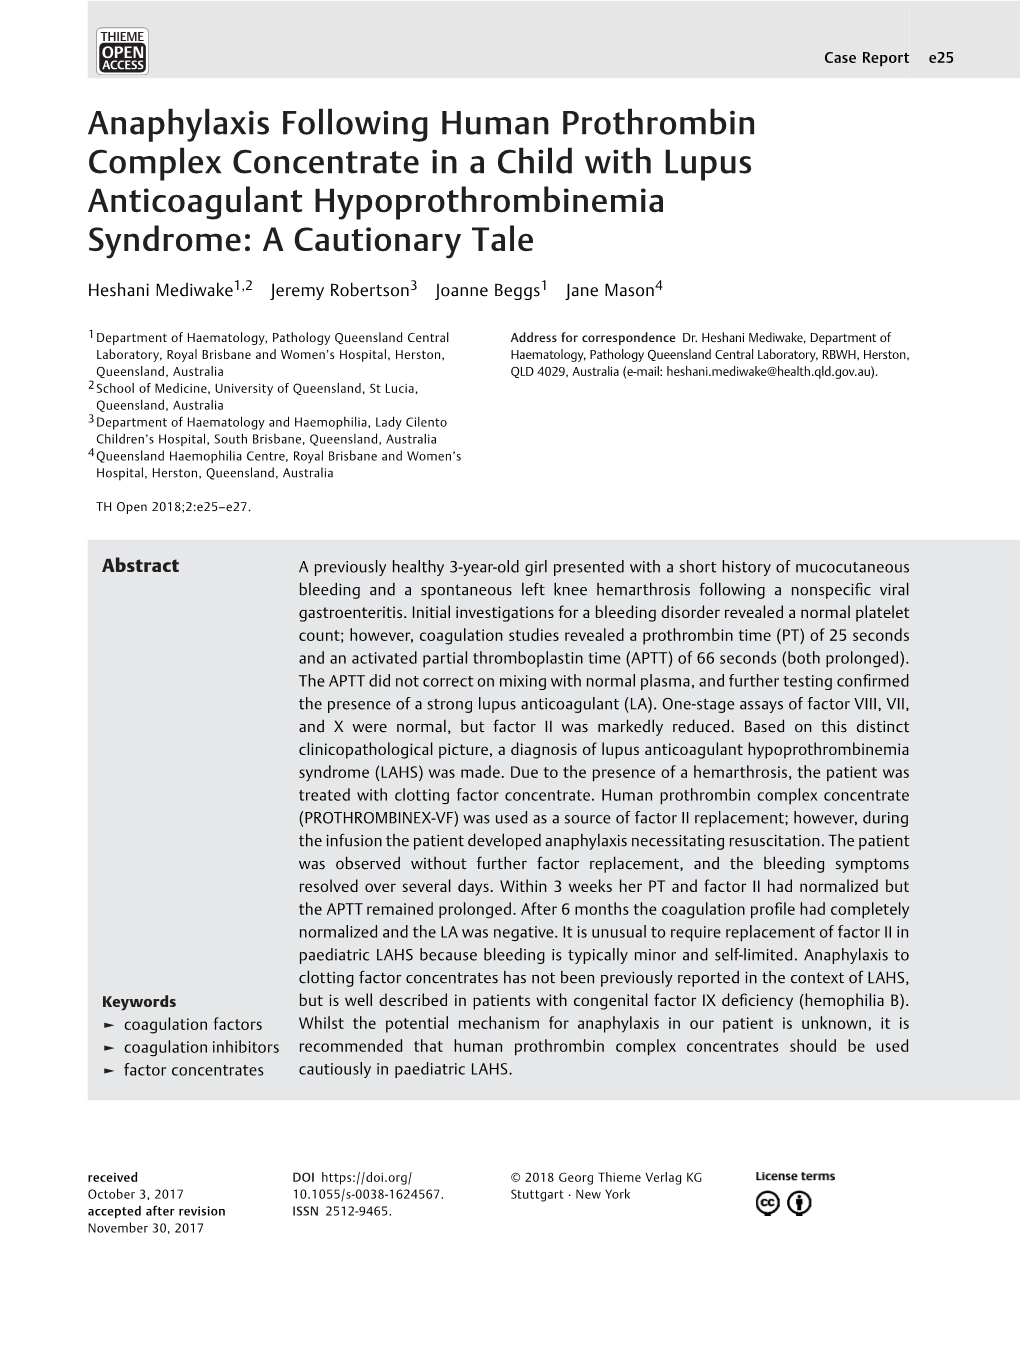 Anaphylaxis Following Human Prothrombin Complex Concentrate in a Child with Lupus Anticoagulant Hypoprothrombinemia Syndrome: a Cautionary Tale